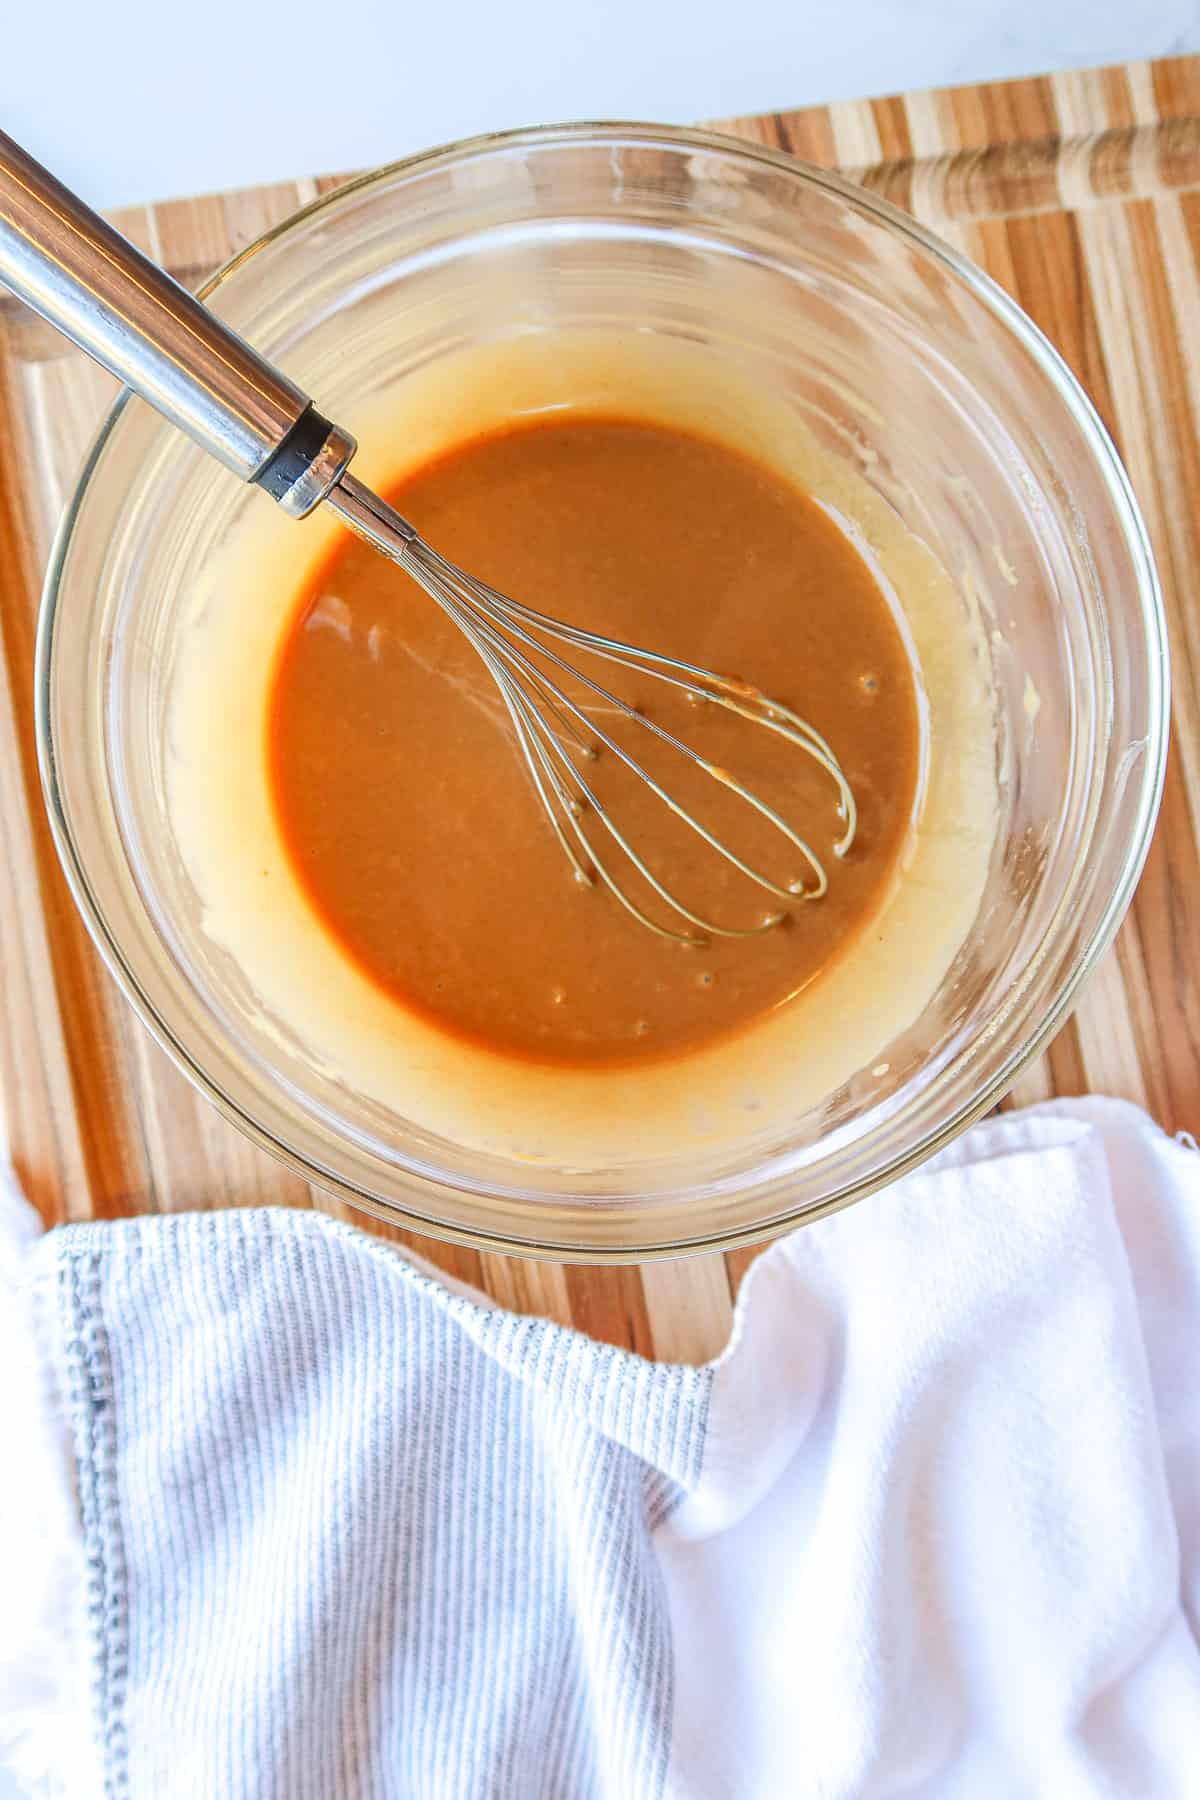 Peanut sauce whisked up in a glass mixing bowl.